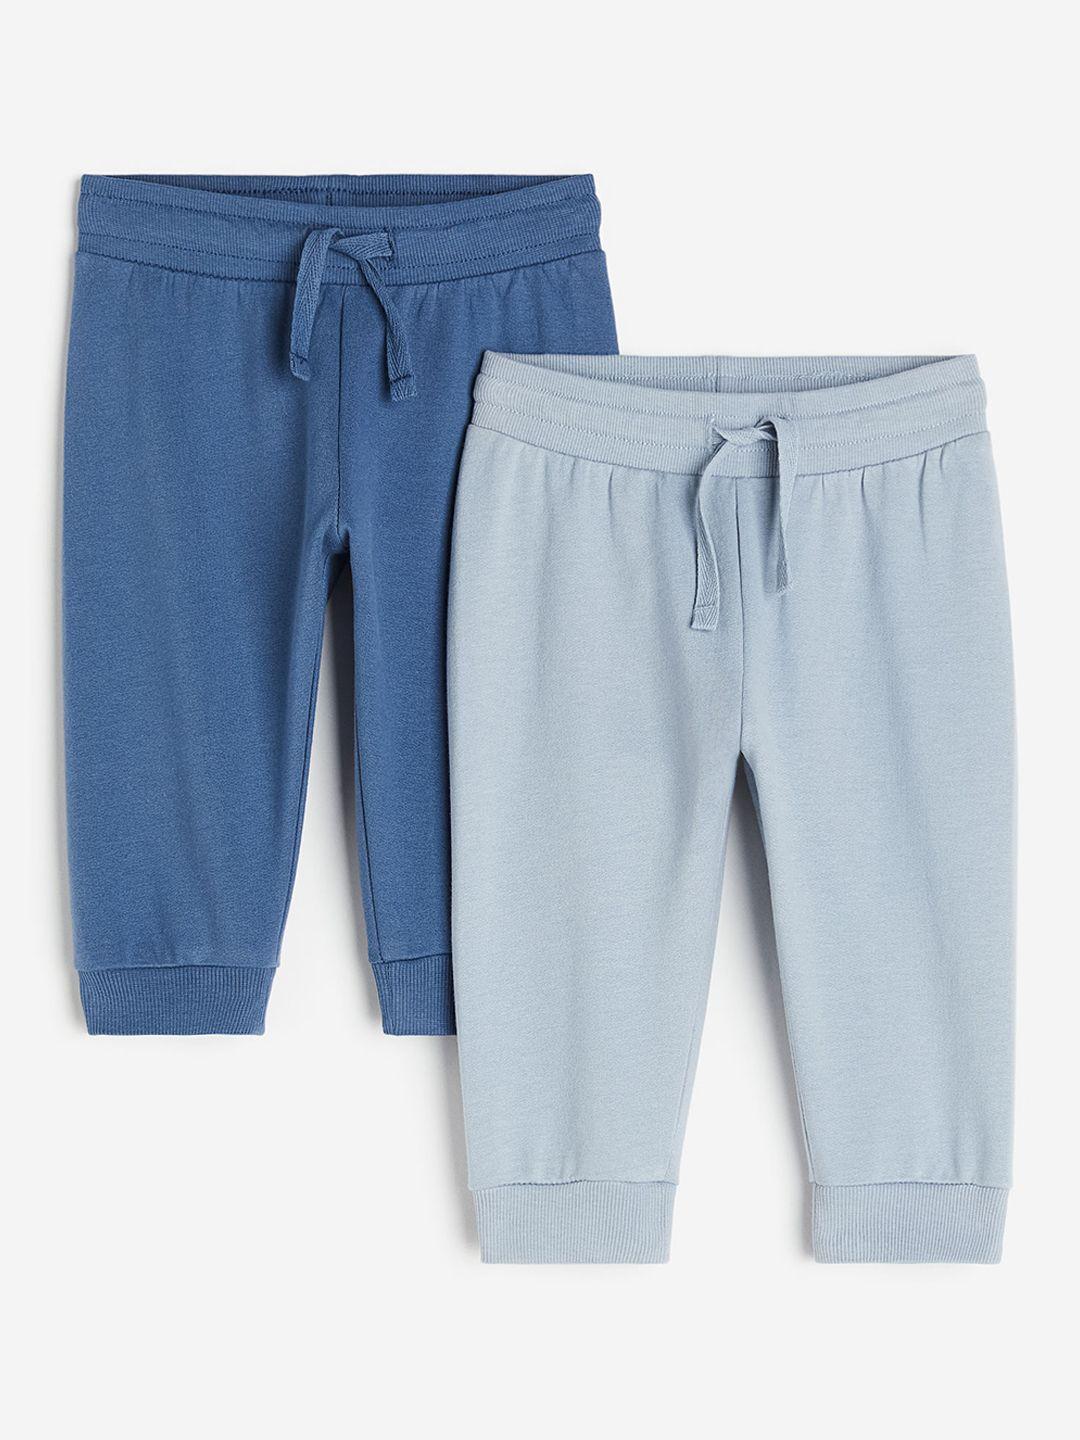 h&m boys 2 pack joggers